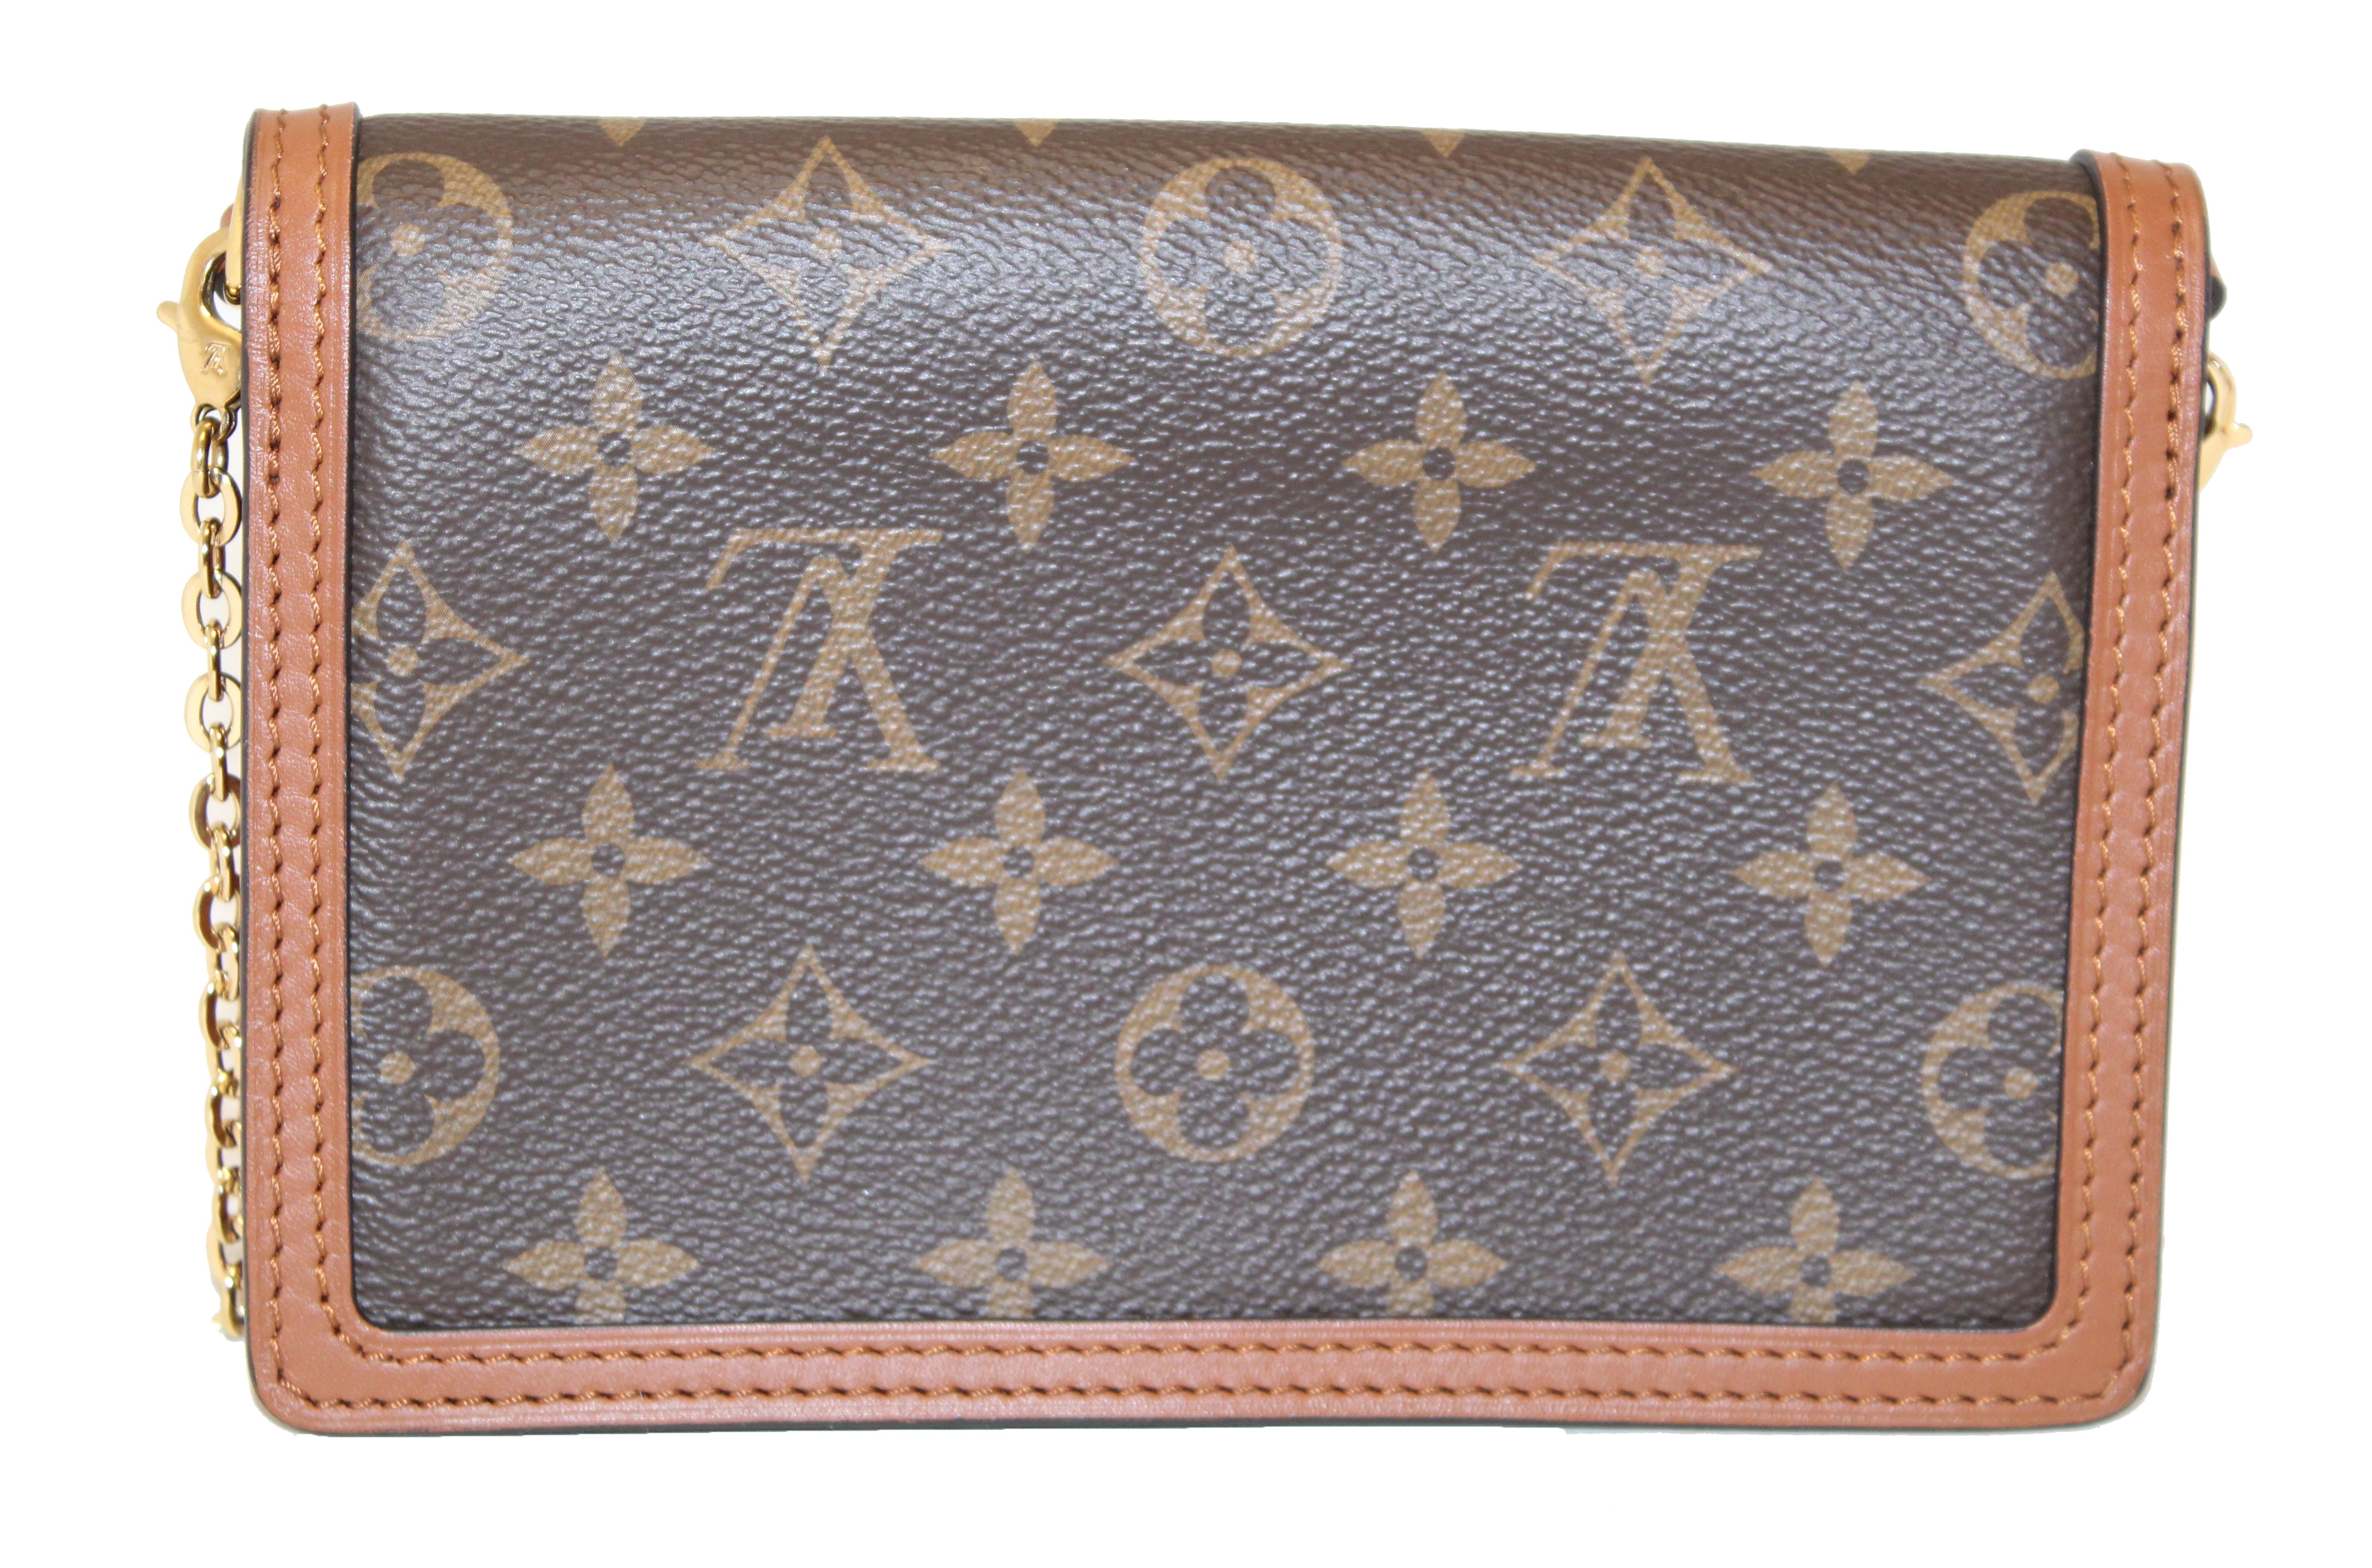 Micro Dauphine Other Monogram Canvas - Wallets and Small Leather Goods